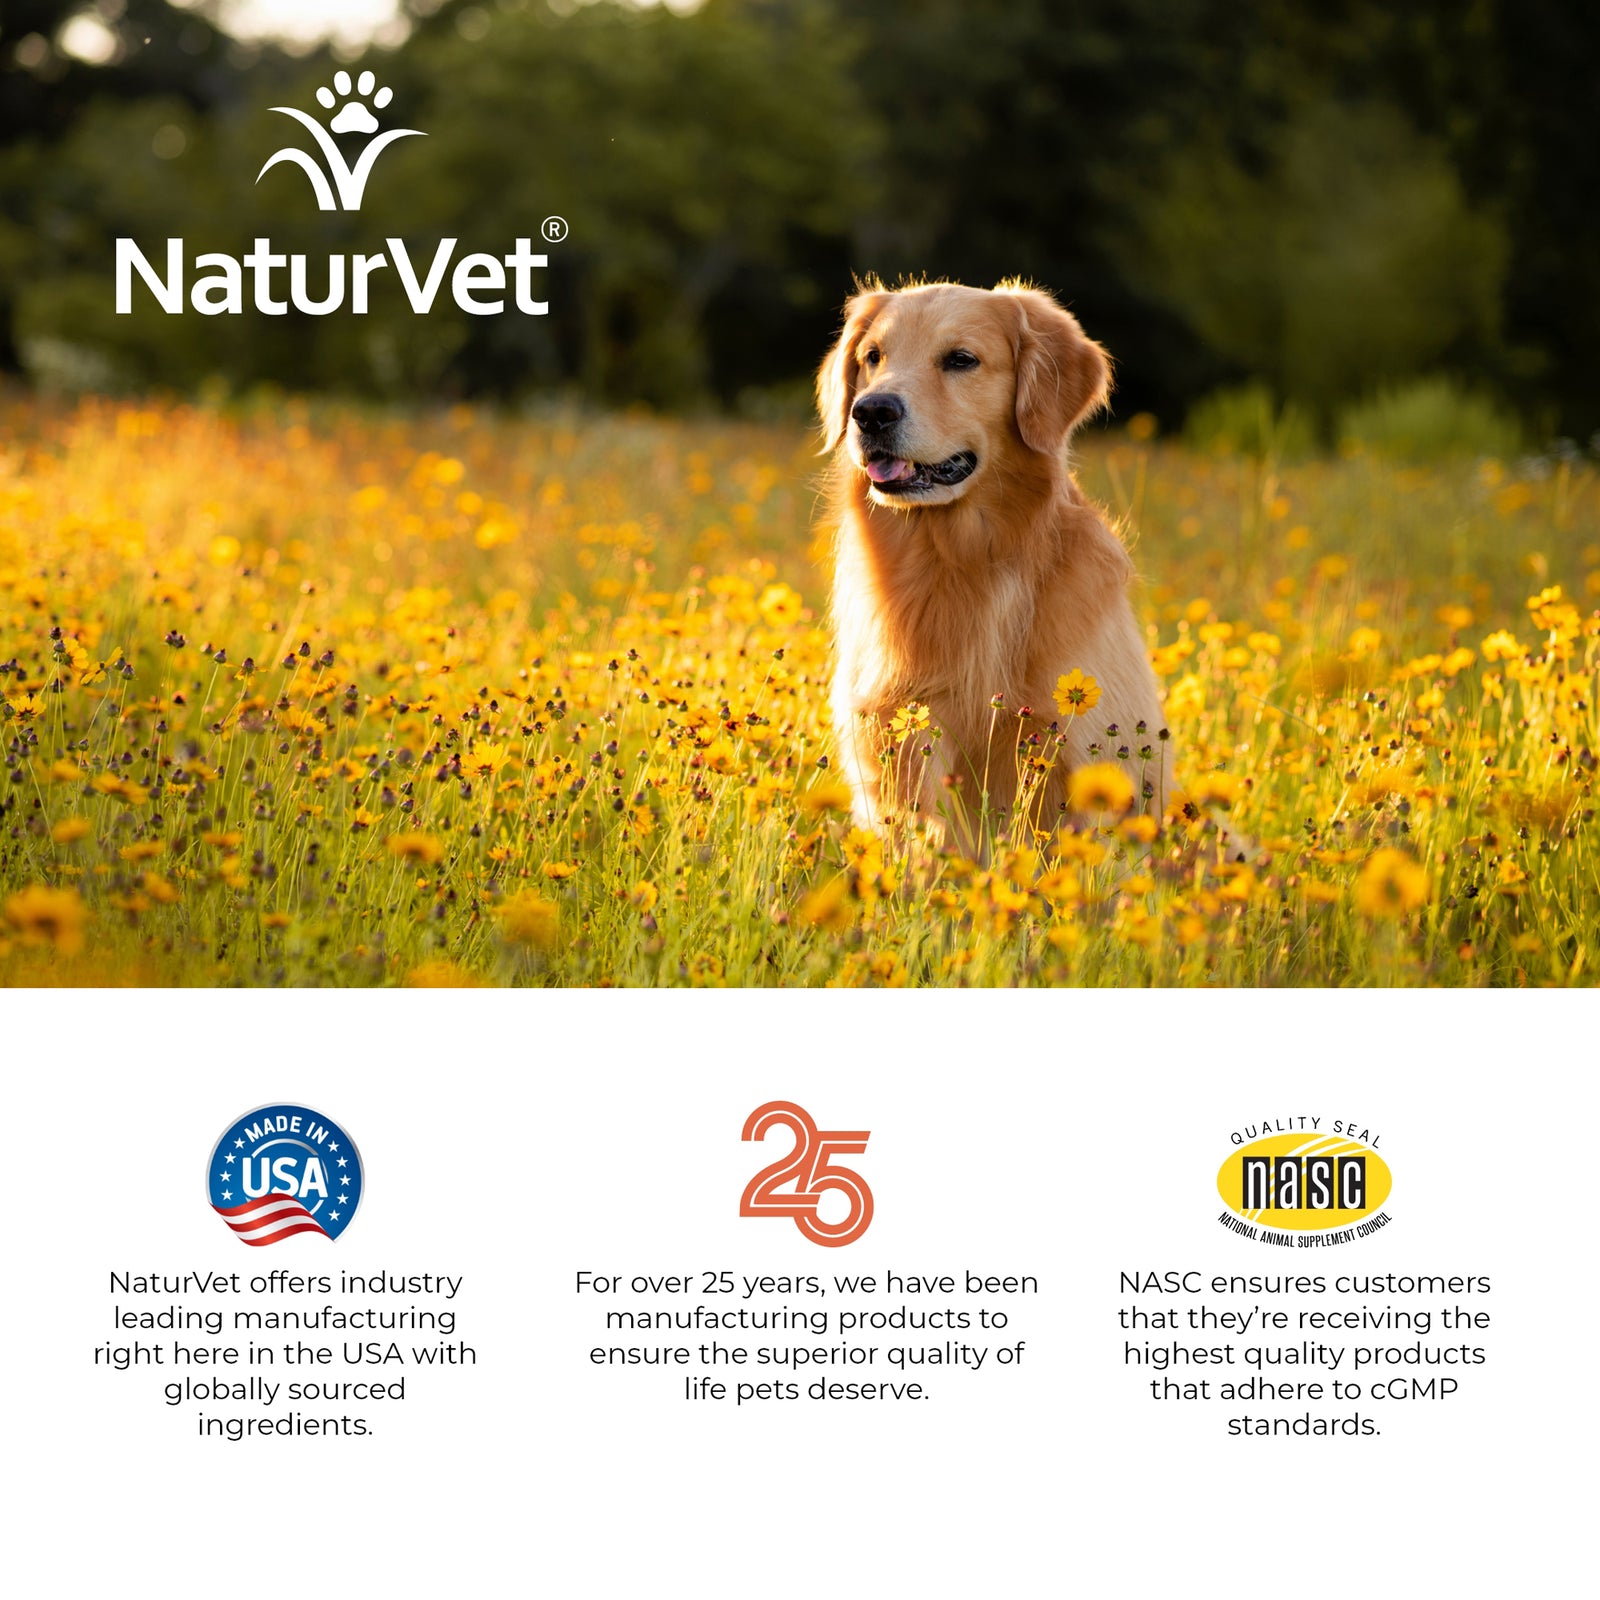 NaturVet Aller911 Calming Aid Plus Allergy Aid Chewable Tabs for Dogs